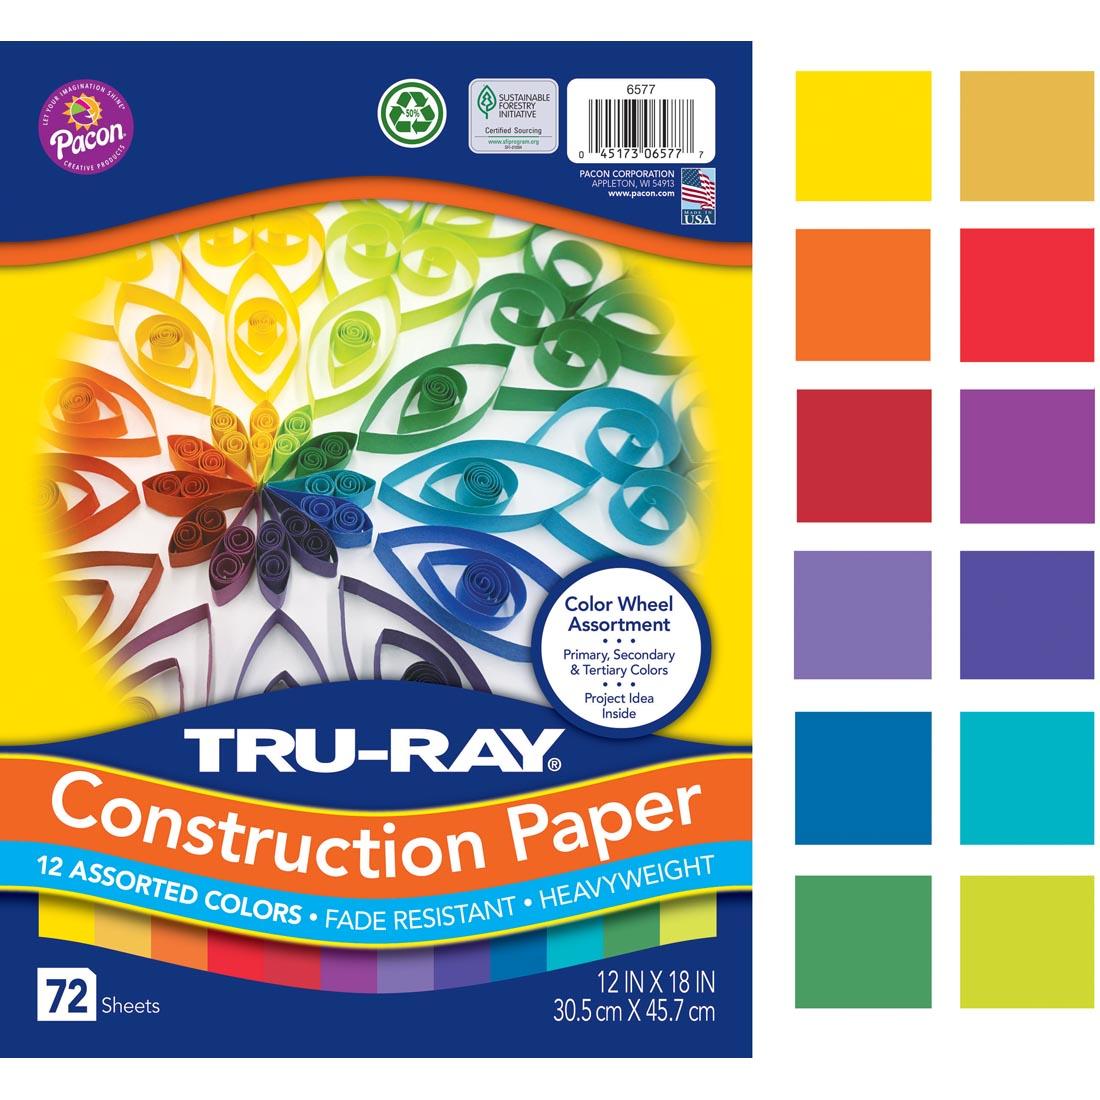 Tru-Ray Color Wheel Construction Paper Assortment package beside 12 Color Swatches